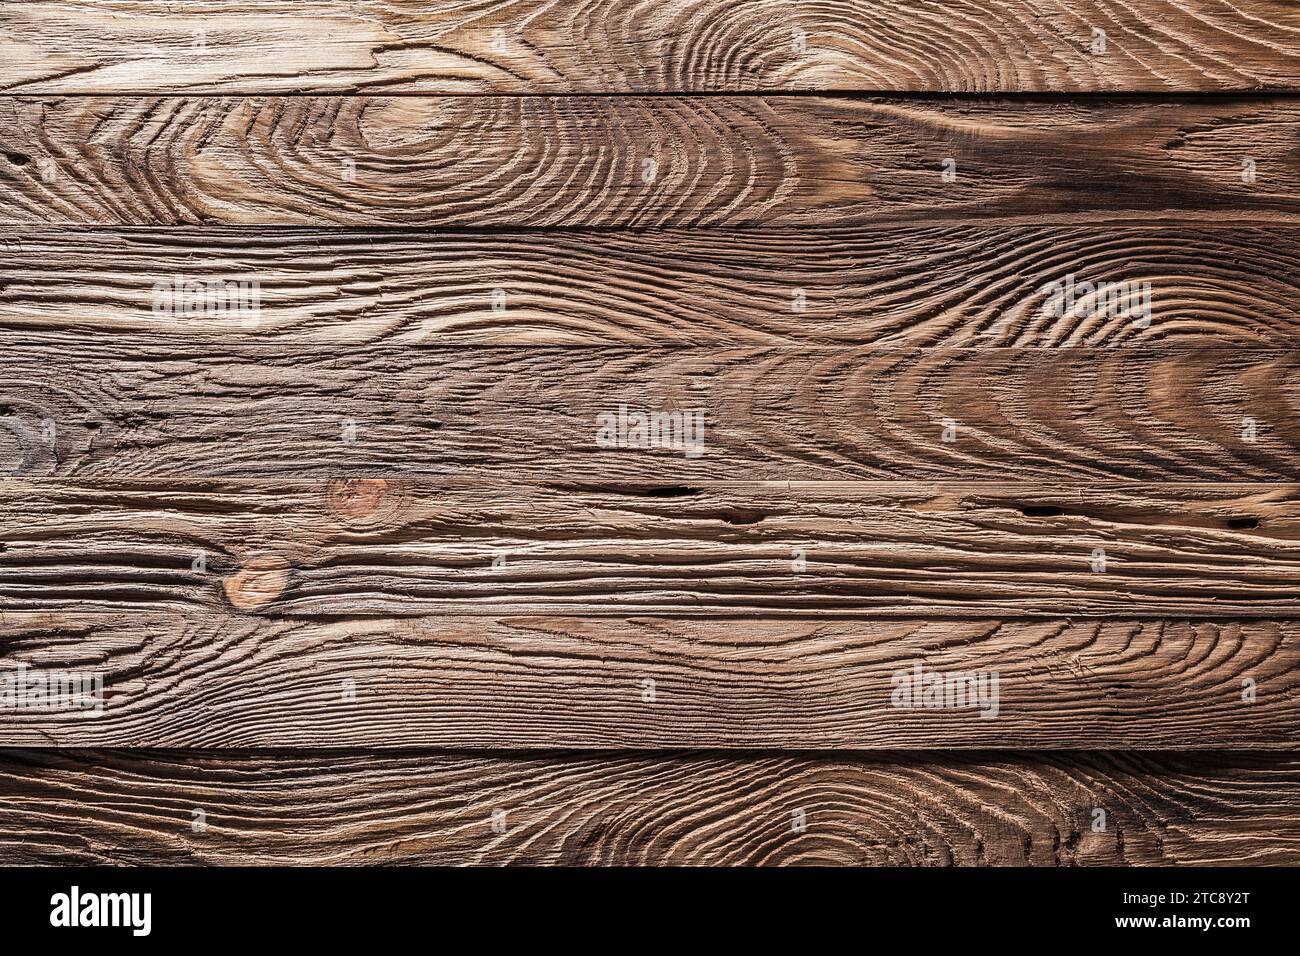 General view vintage wood texture Stock Photo